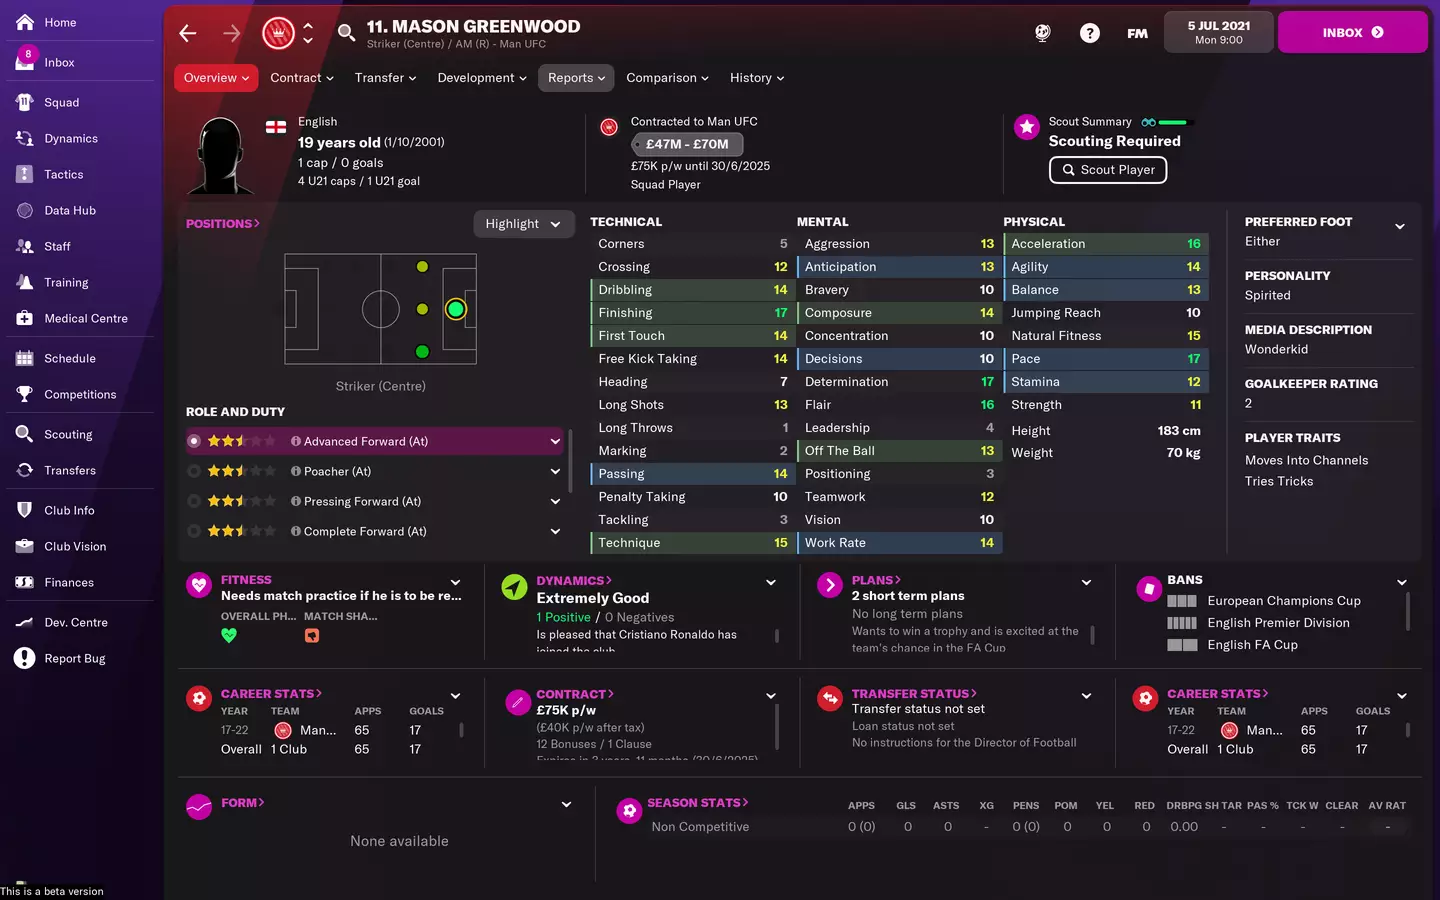 Best Strikers Football Manager 2022 The 20 Best Young Strikers To Sign